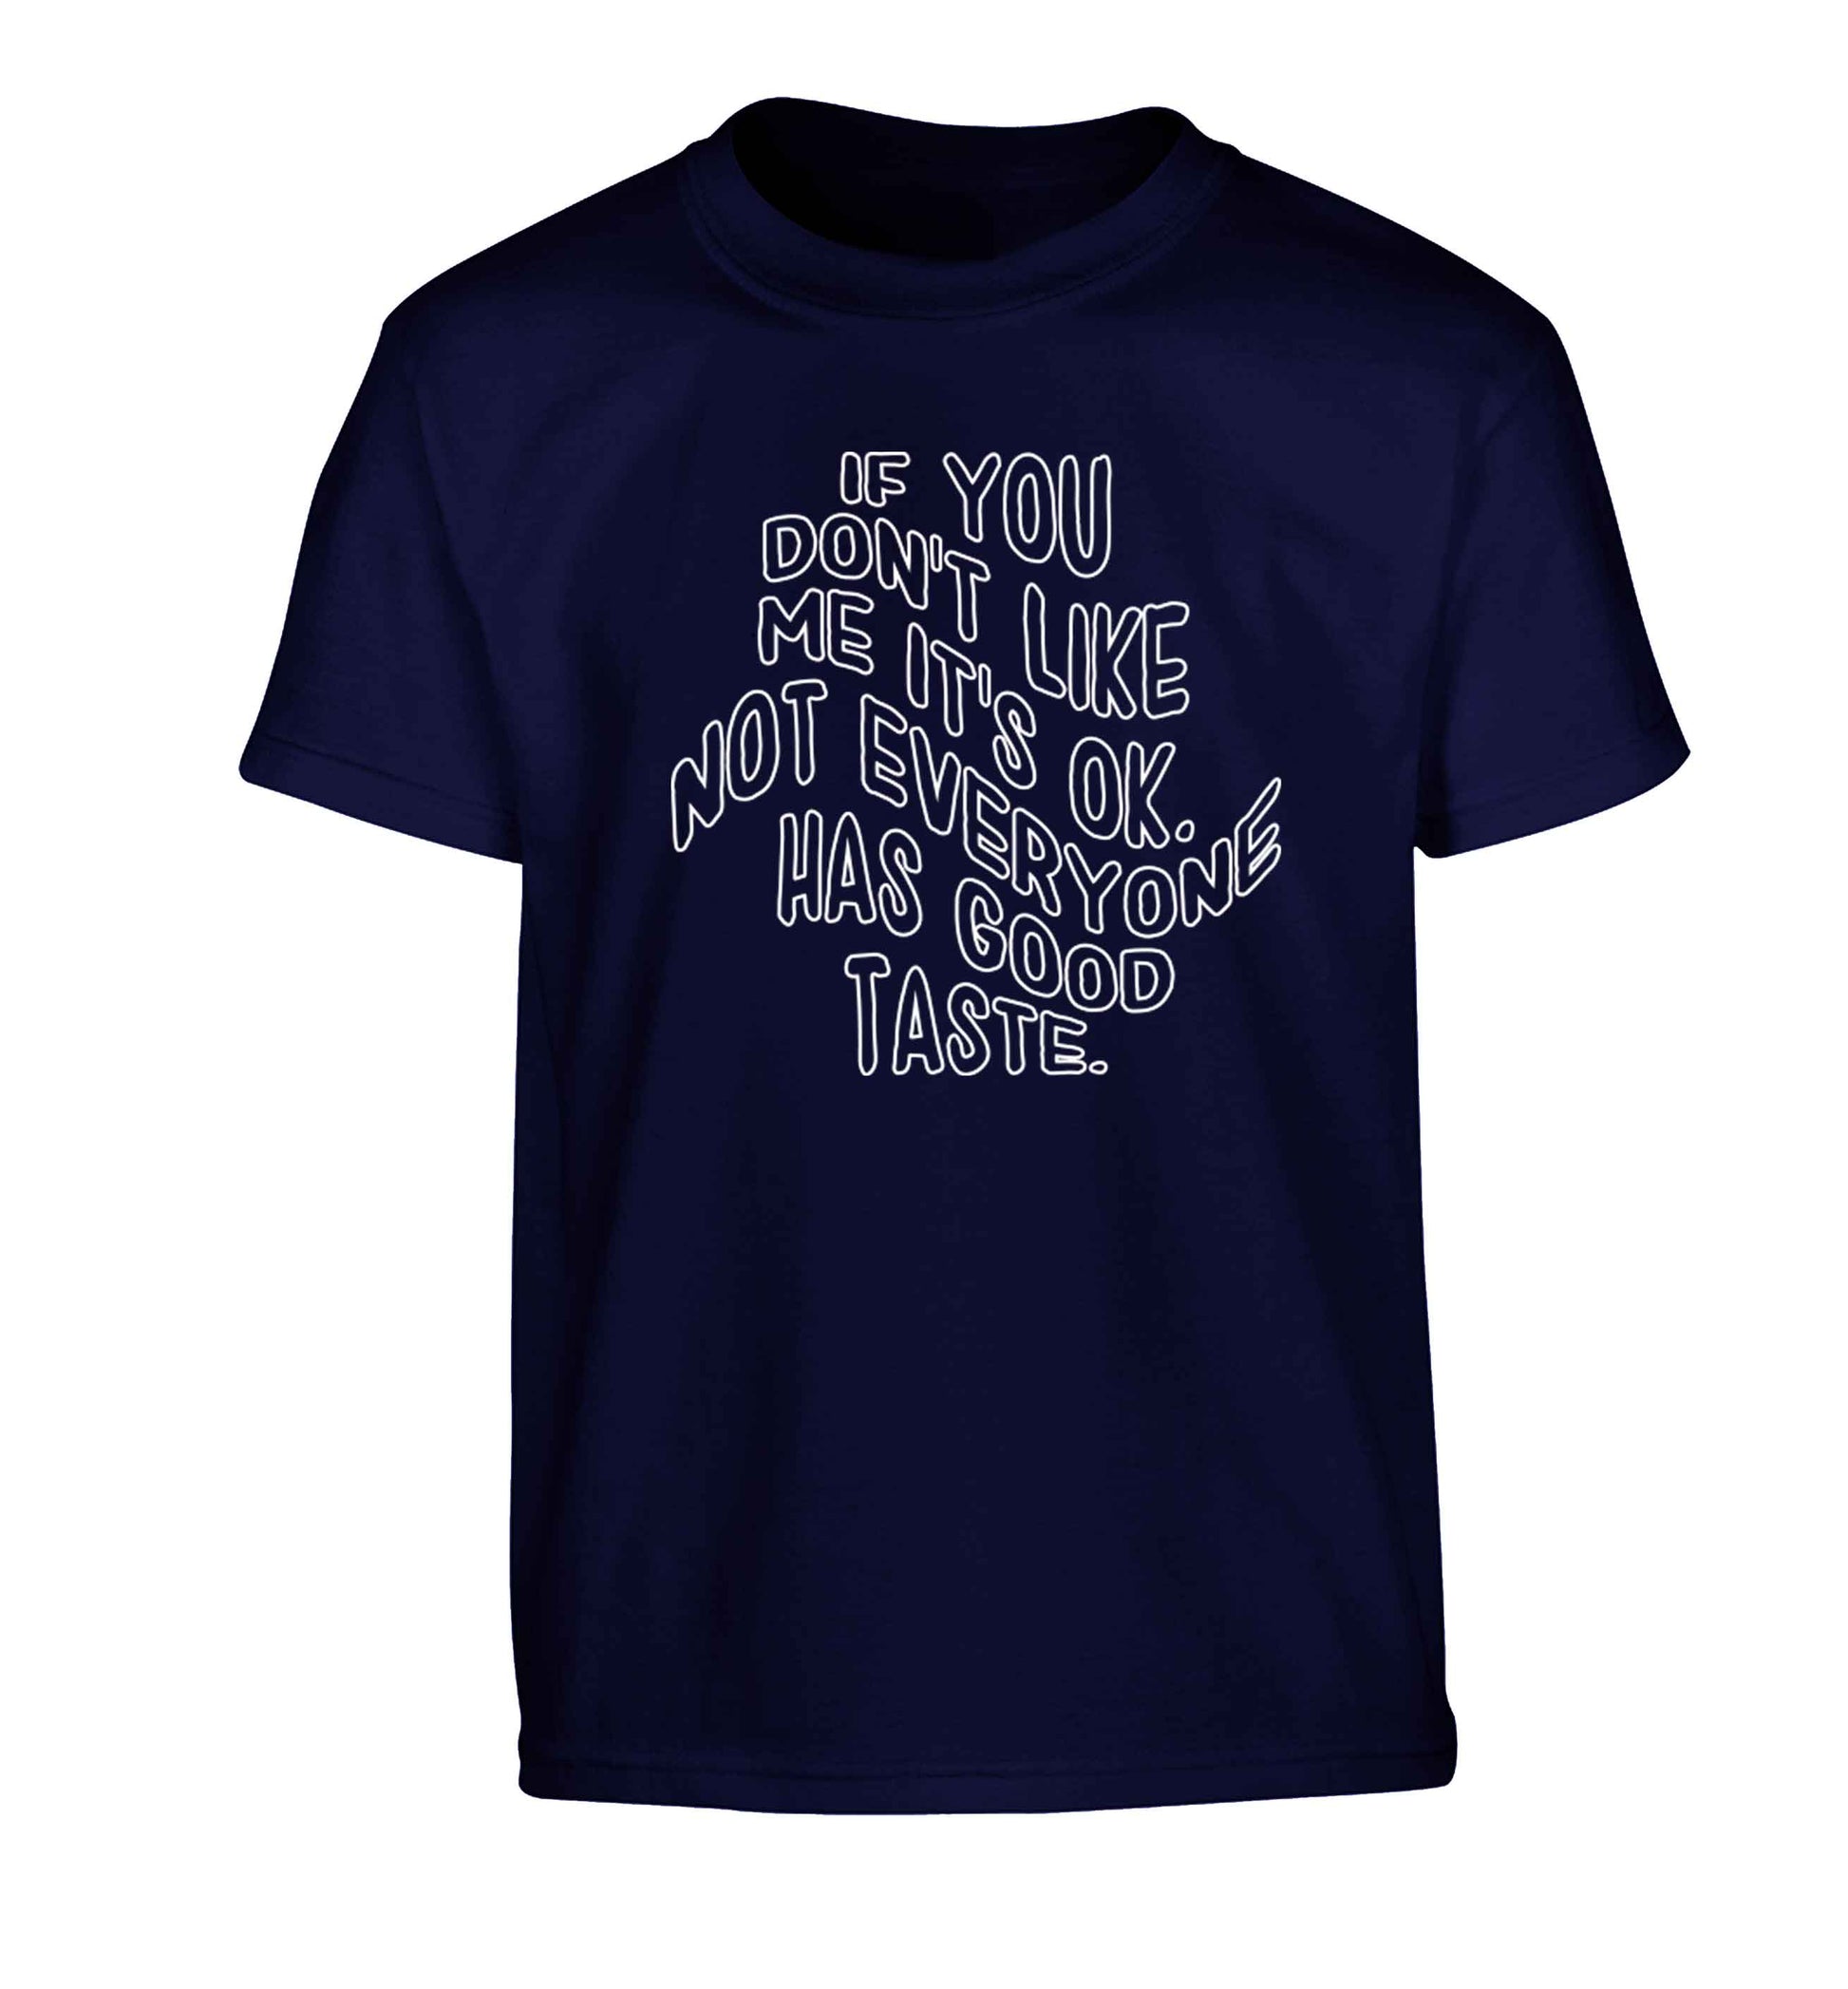 If you don't like me it's ok not everyone has good taste Children's navy Tshirt 12-13 Years